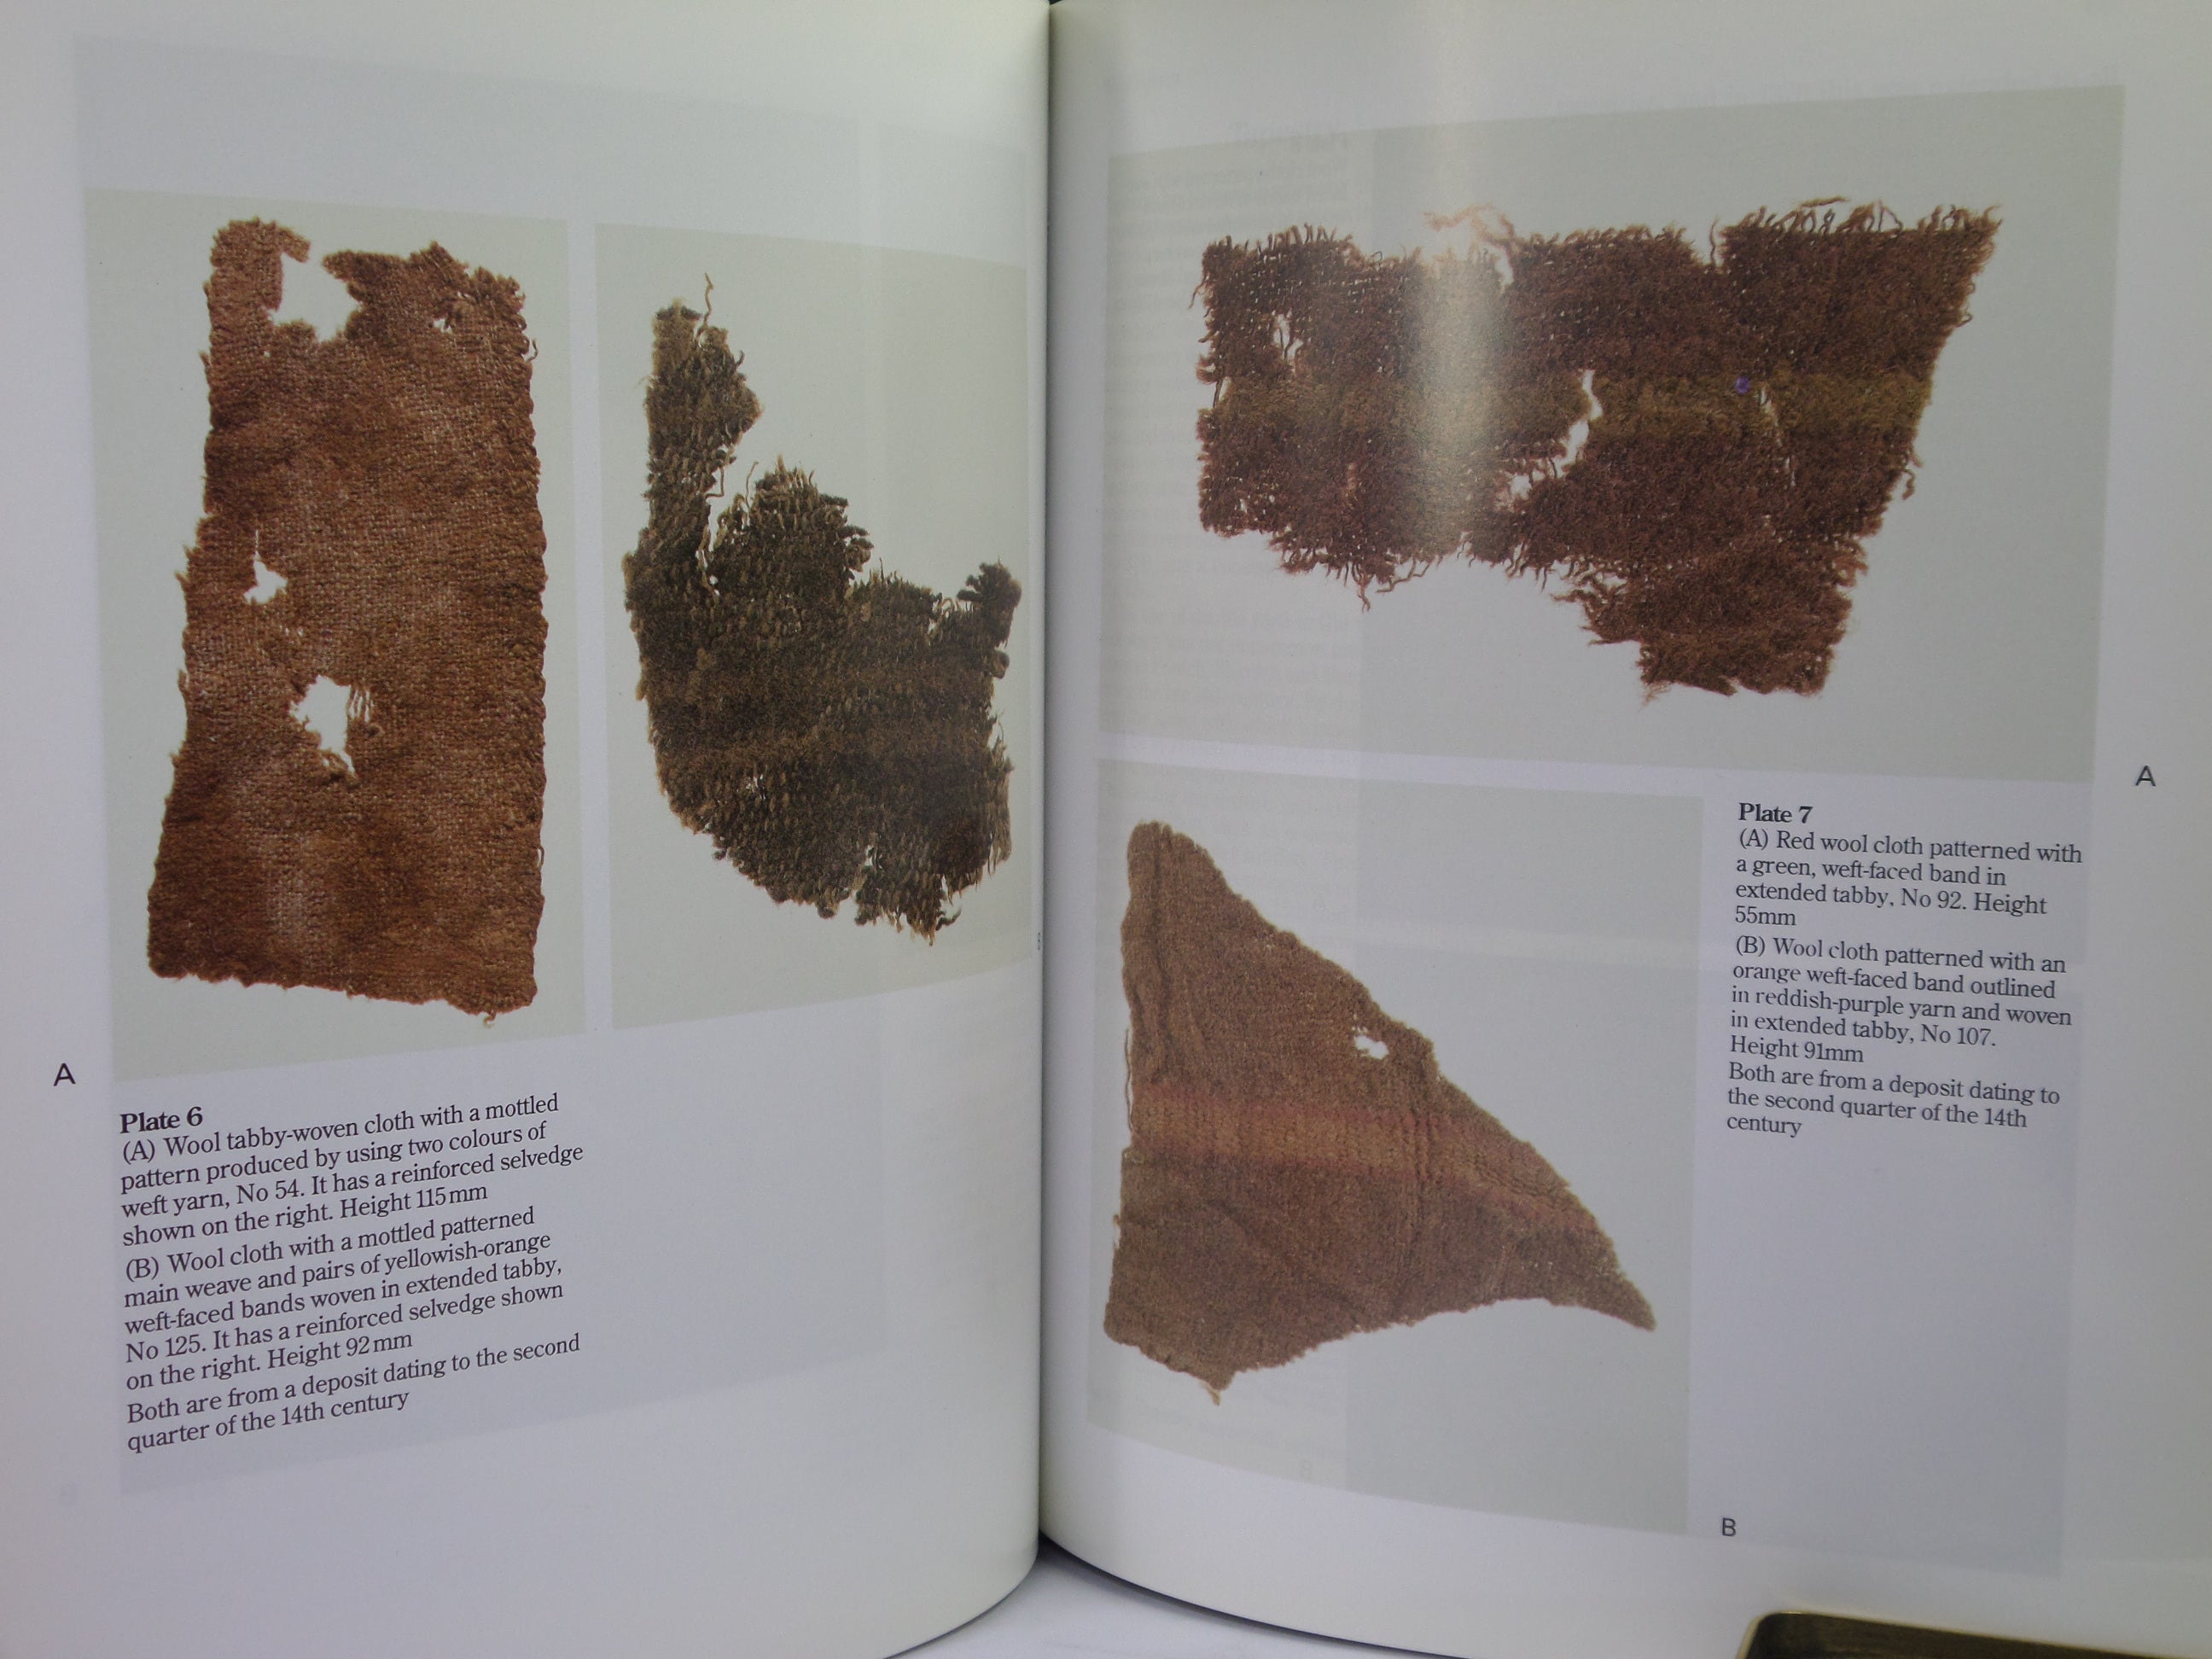 TEXTILES & CLOTHING 1150-1450: MEDIEVAL FINDS FROM EXCAVATIONS IN LONDON - 2002